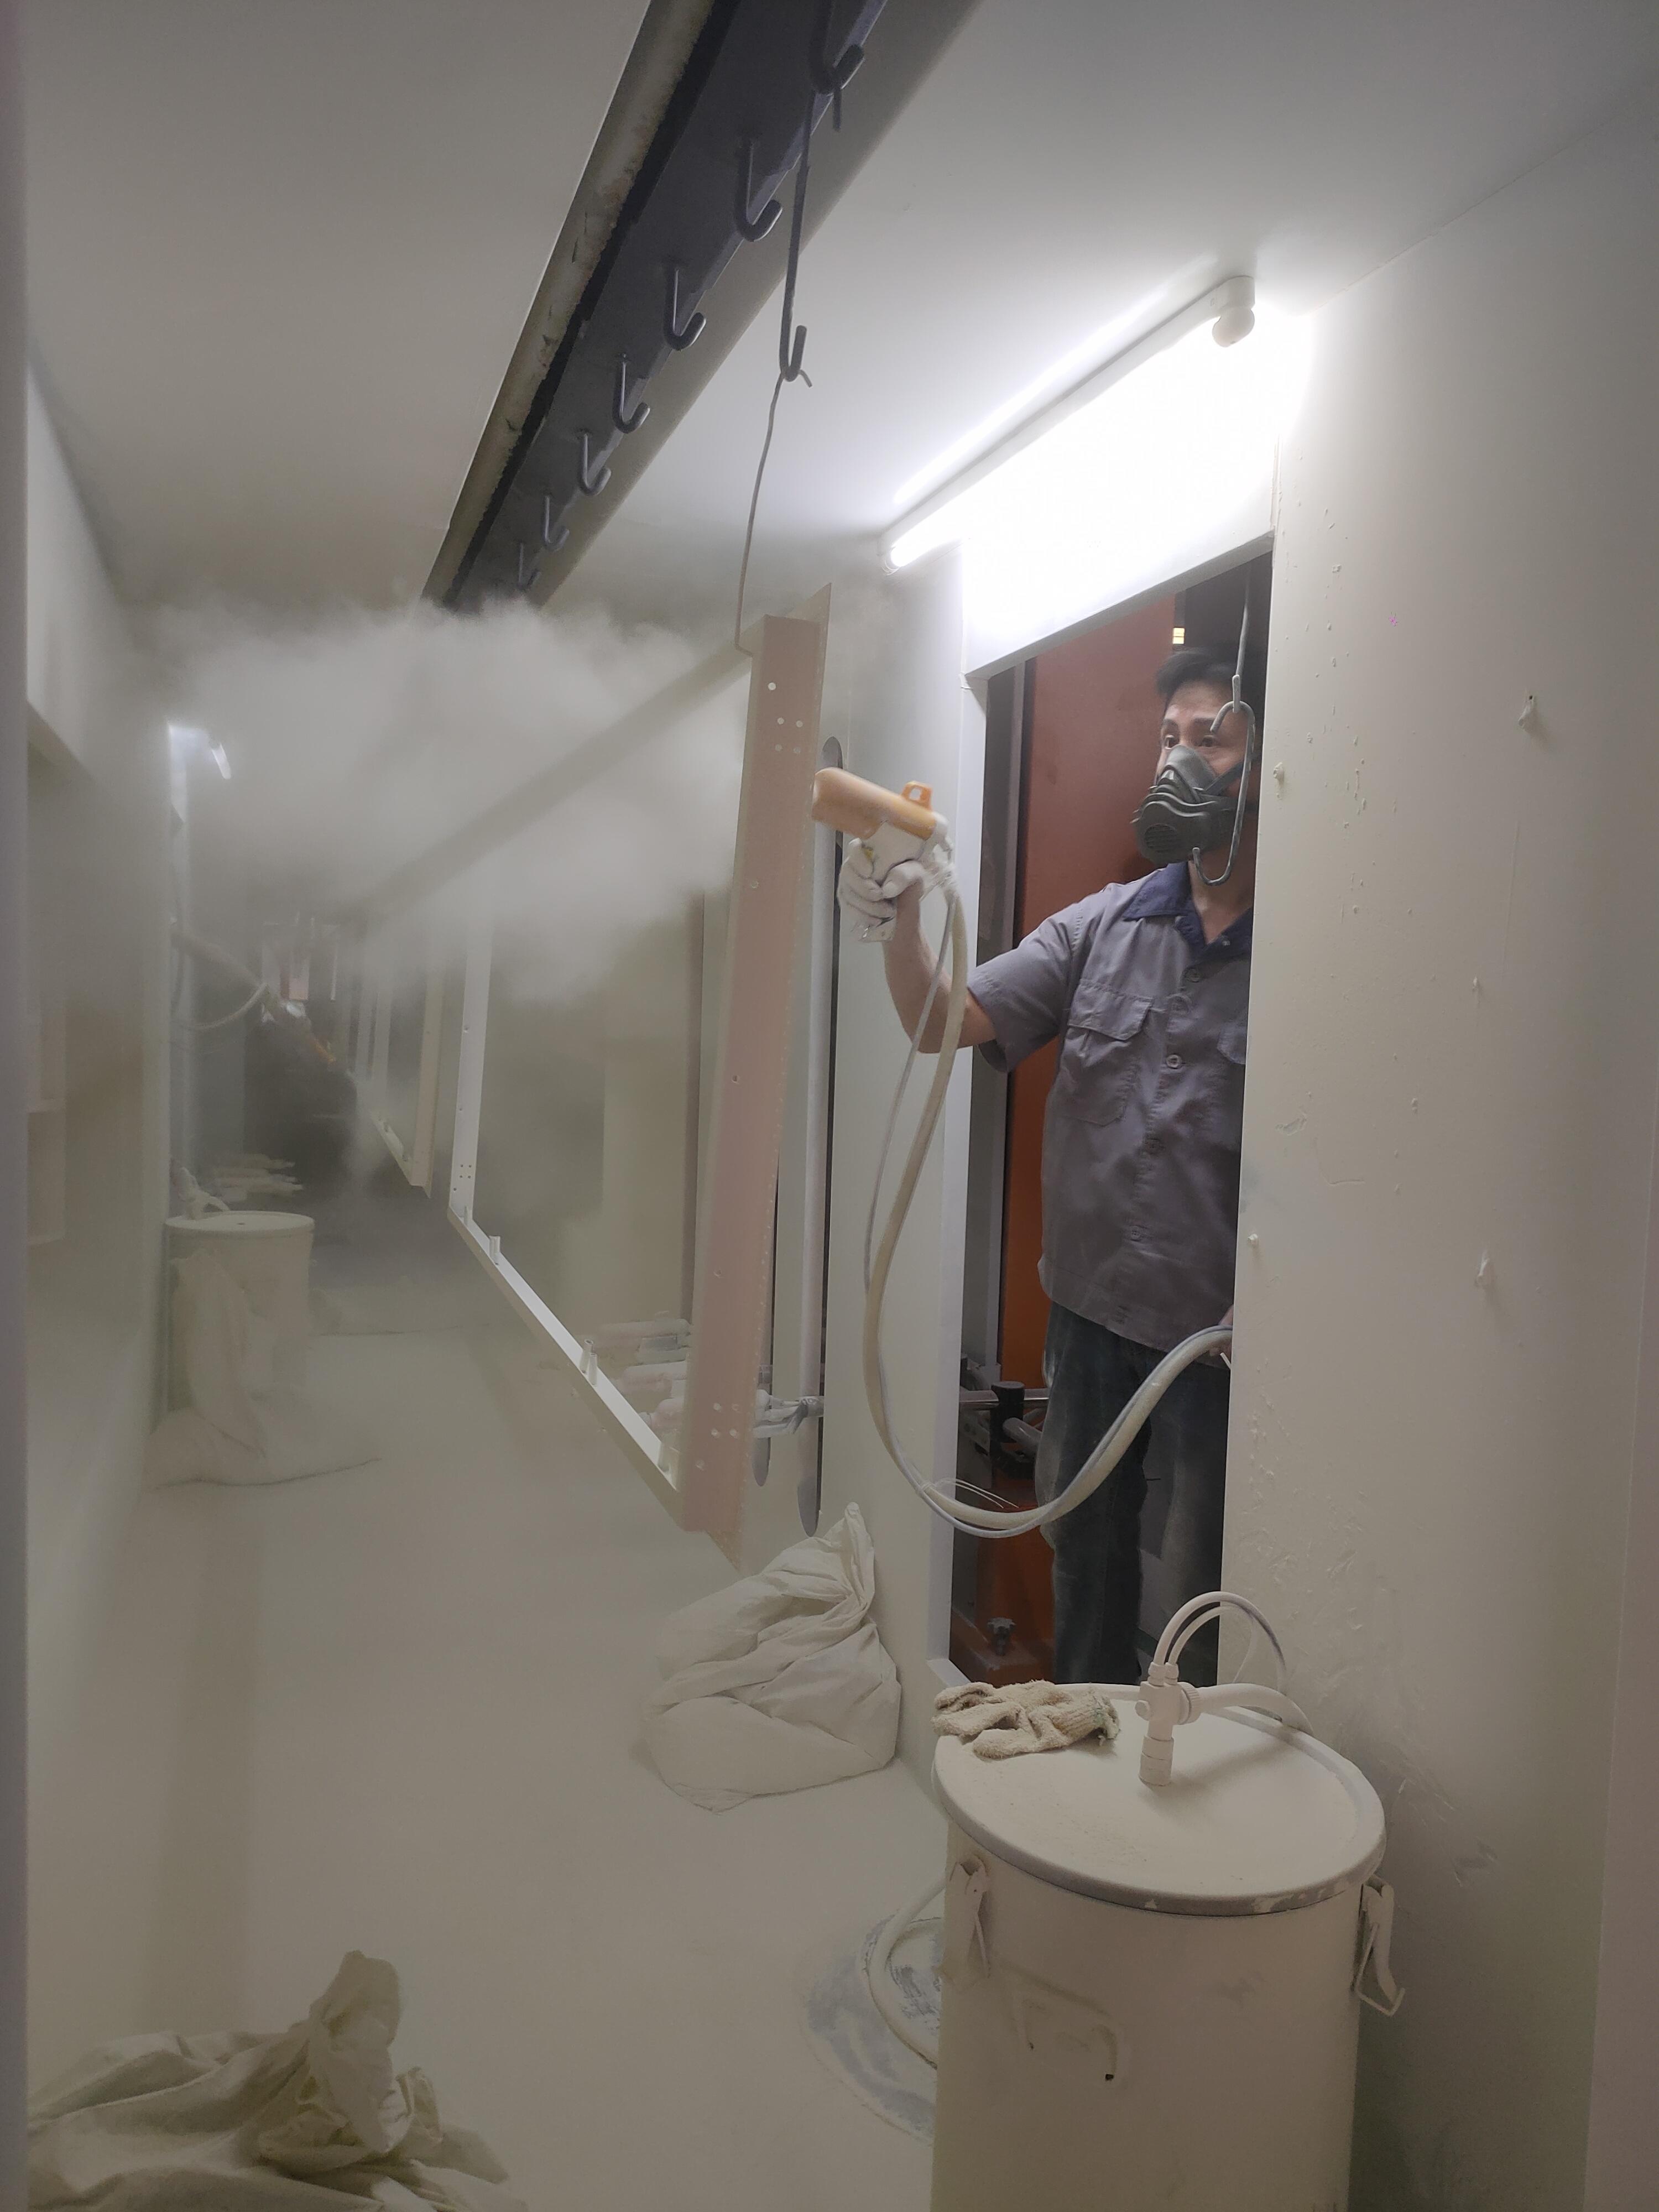 Inspection requirements for powder spraying